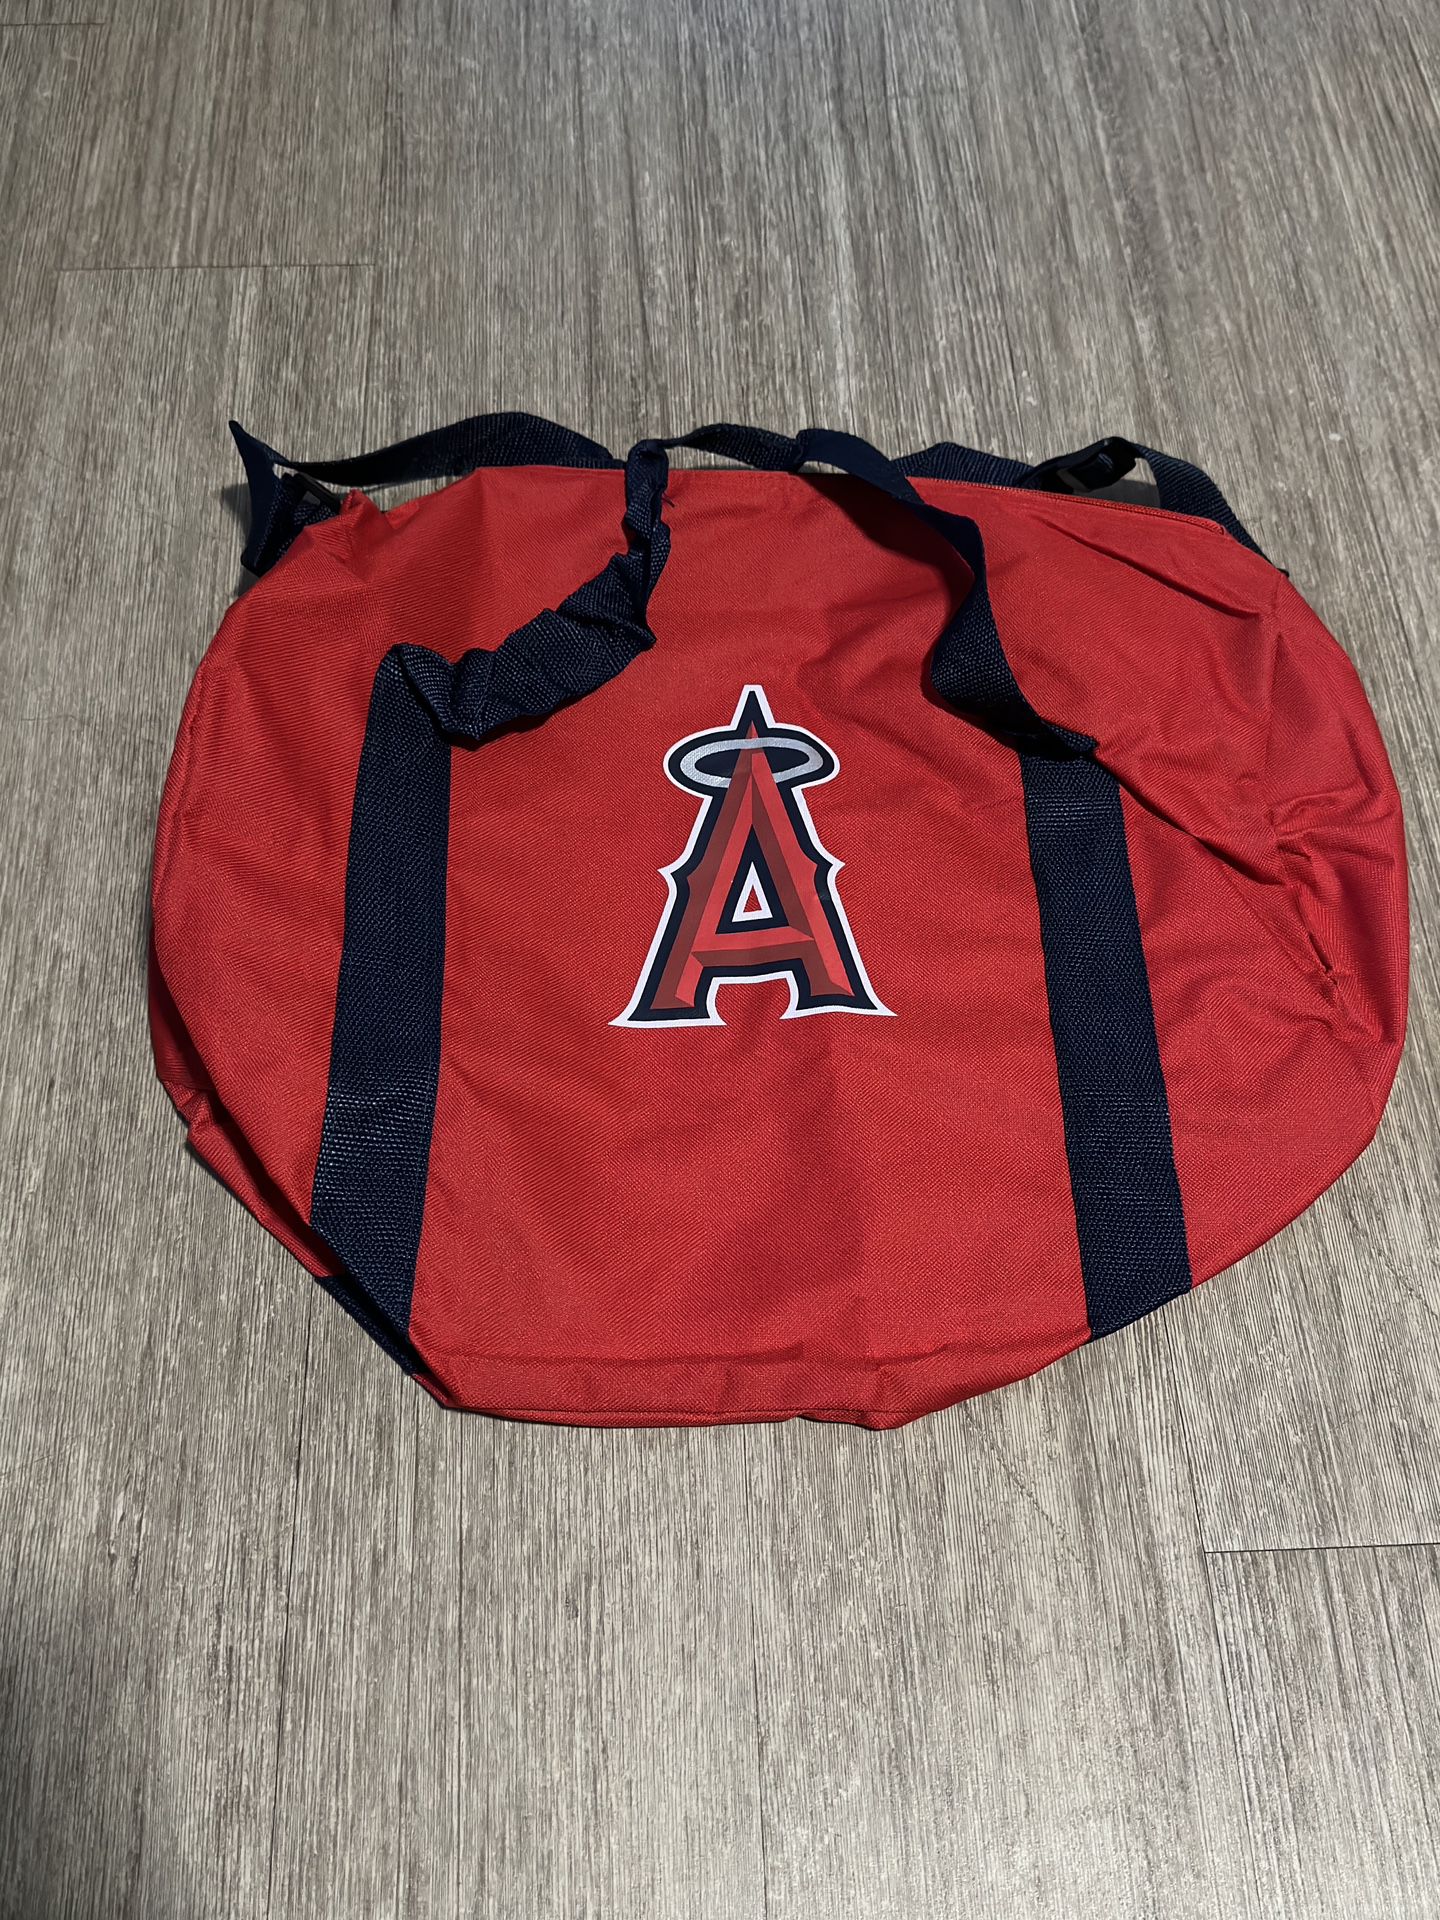 LOS ANGELES ANGELS MIKE TROUT #27 DUFFLE BAG SGA 8/27/19 NEW Never Used